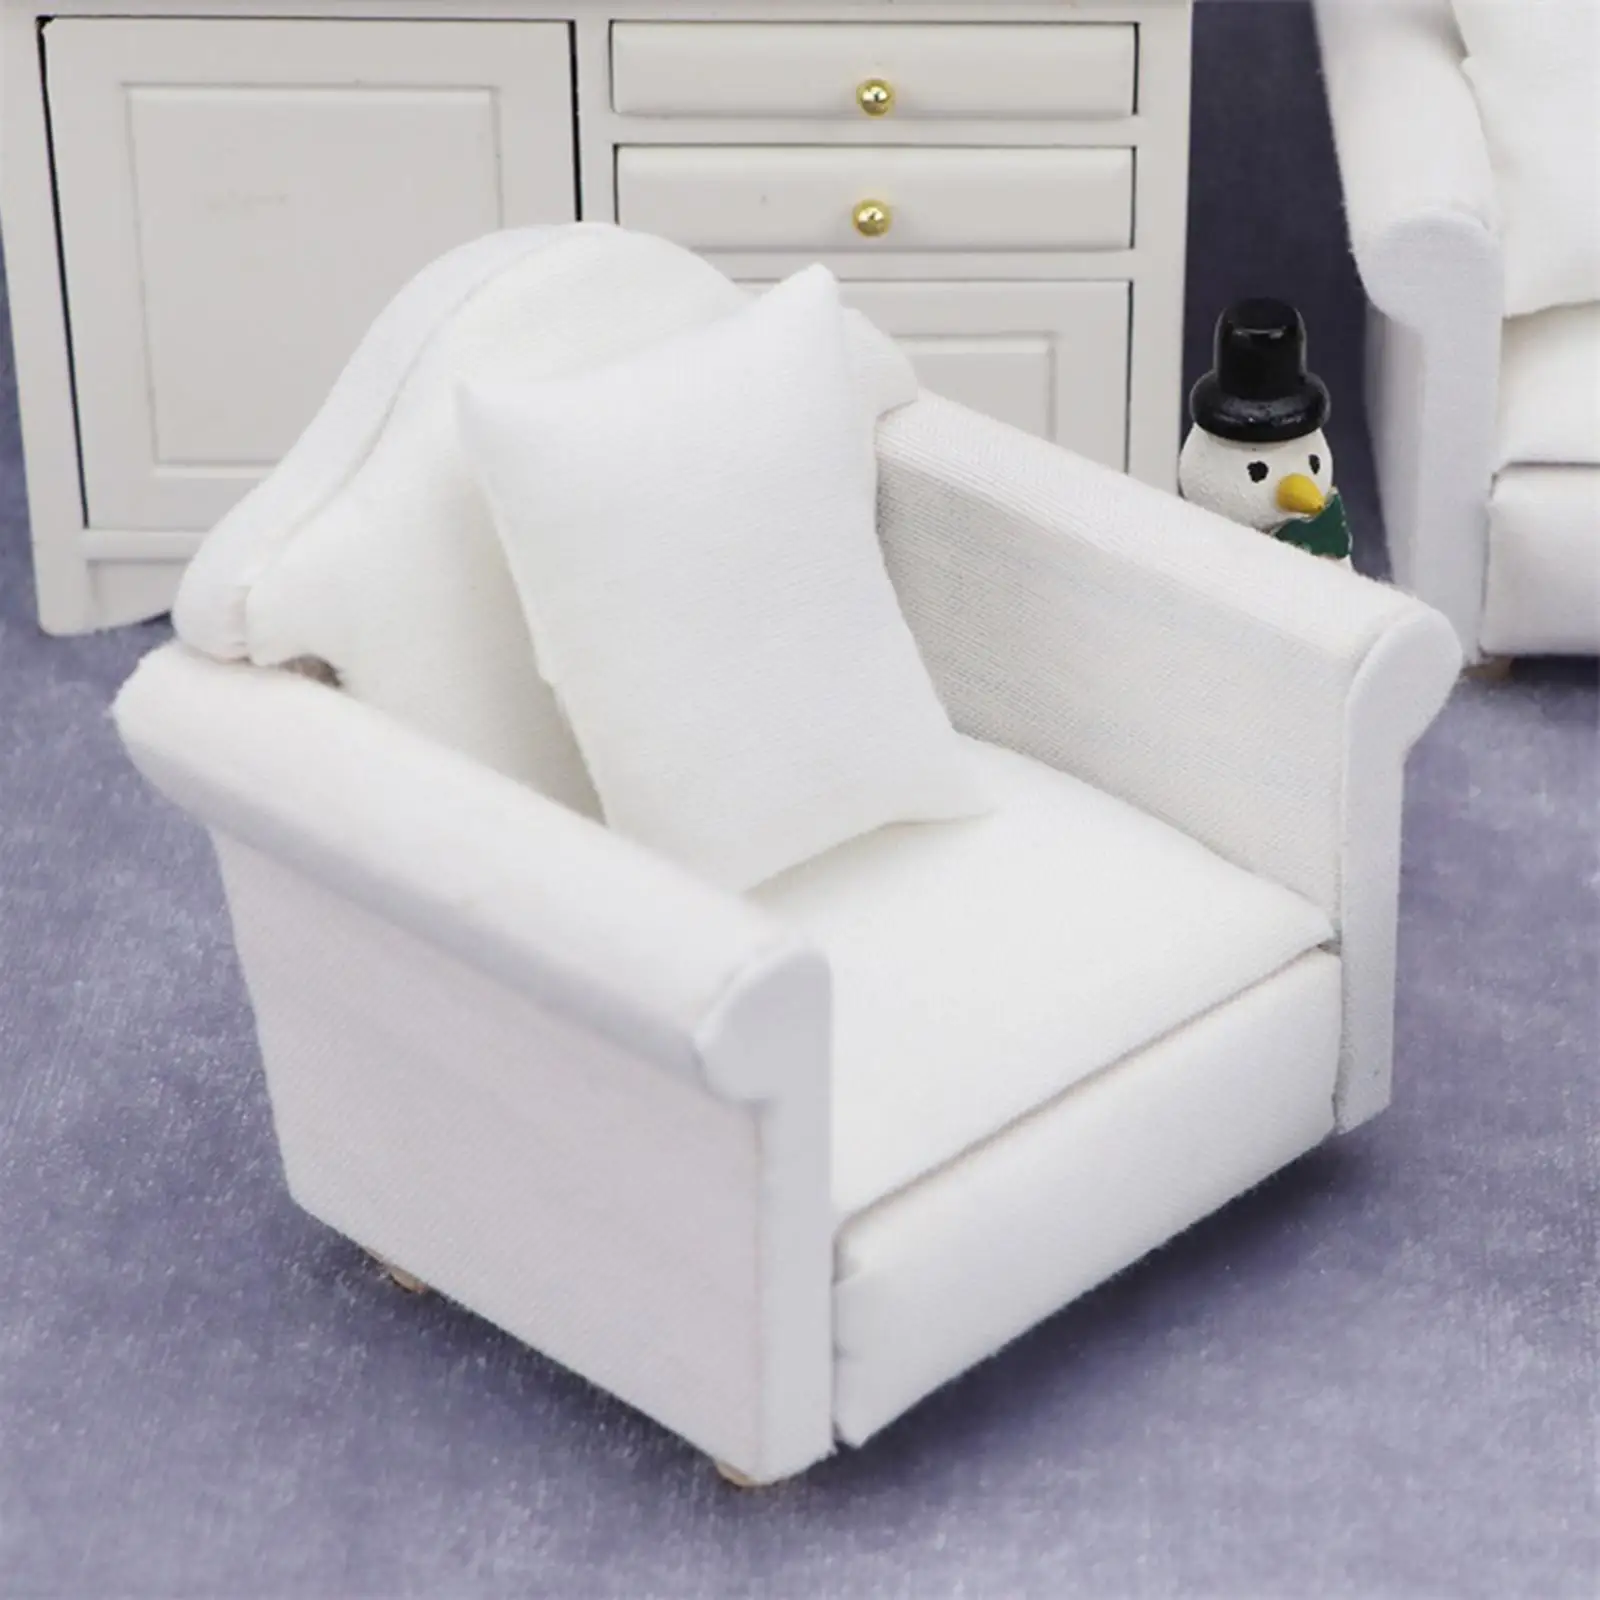 Modern Wood Upholstered Sofa & Cushion Furniture Set White for 1:12 Doll House Living Room Accessory DIY Toys